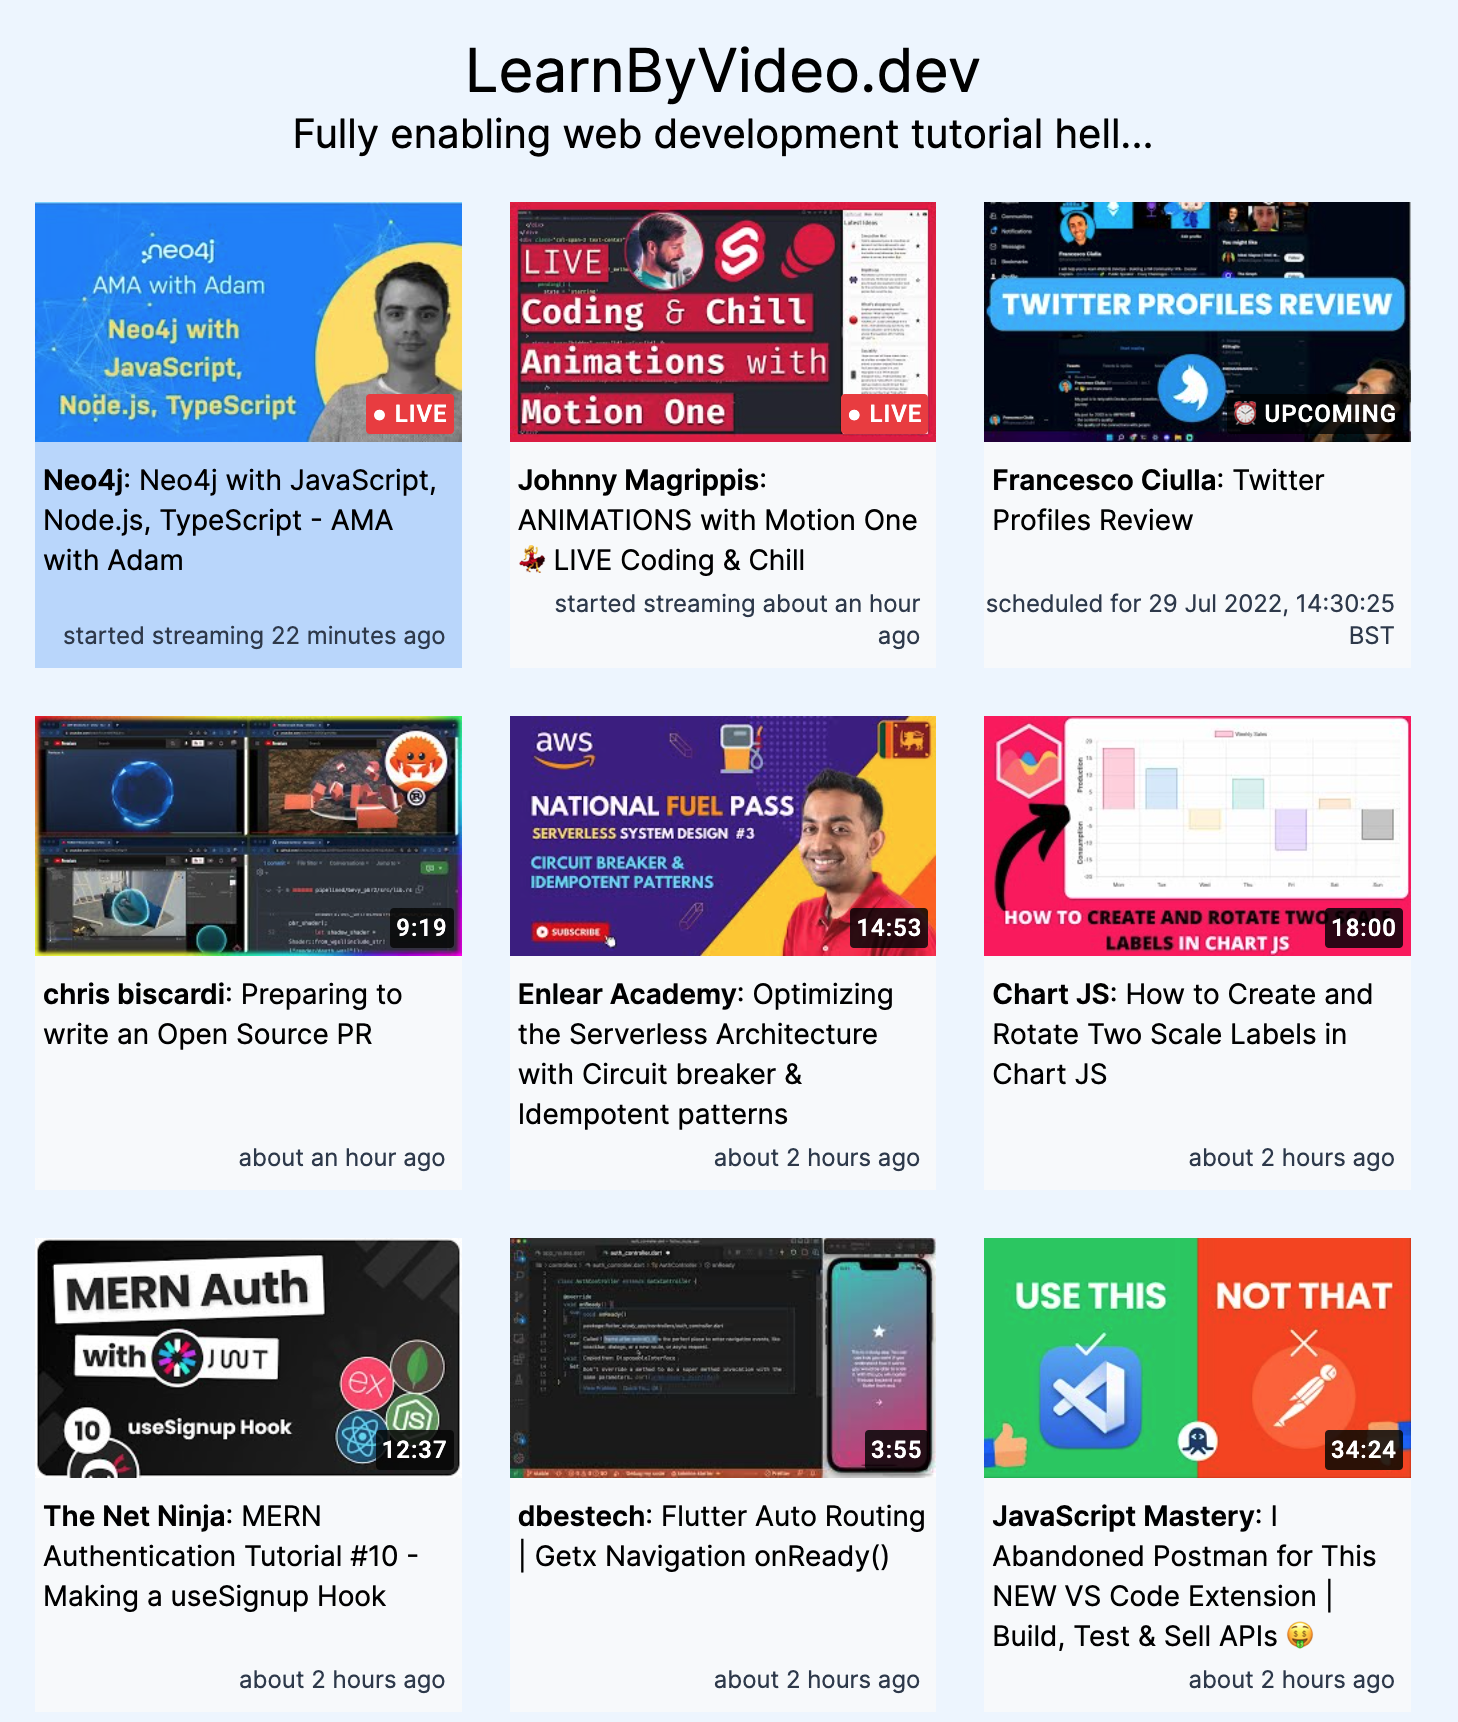 Screenshot of LearnByVideo.dev, showing a grid of recent development tutorials from Youtube